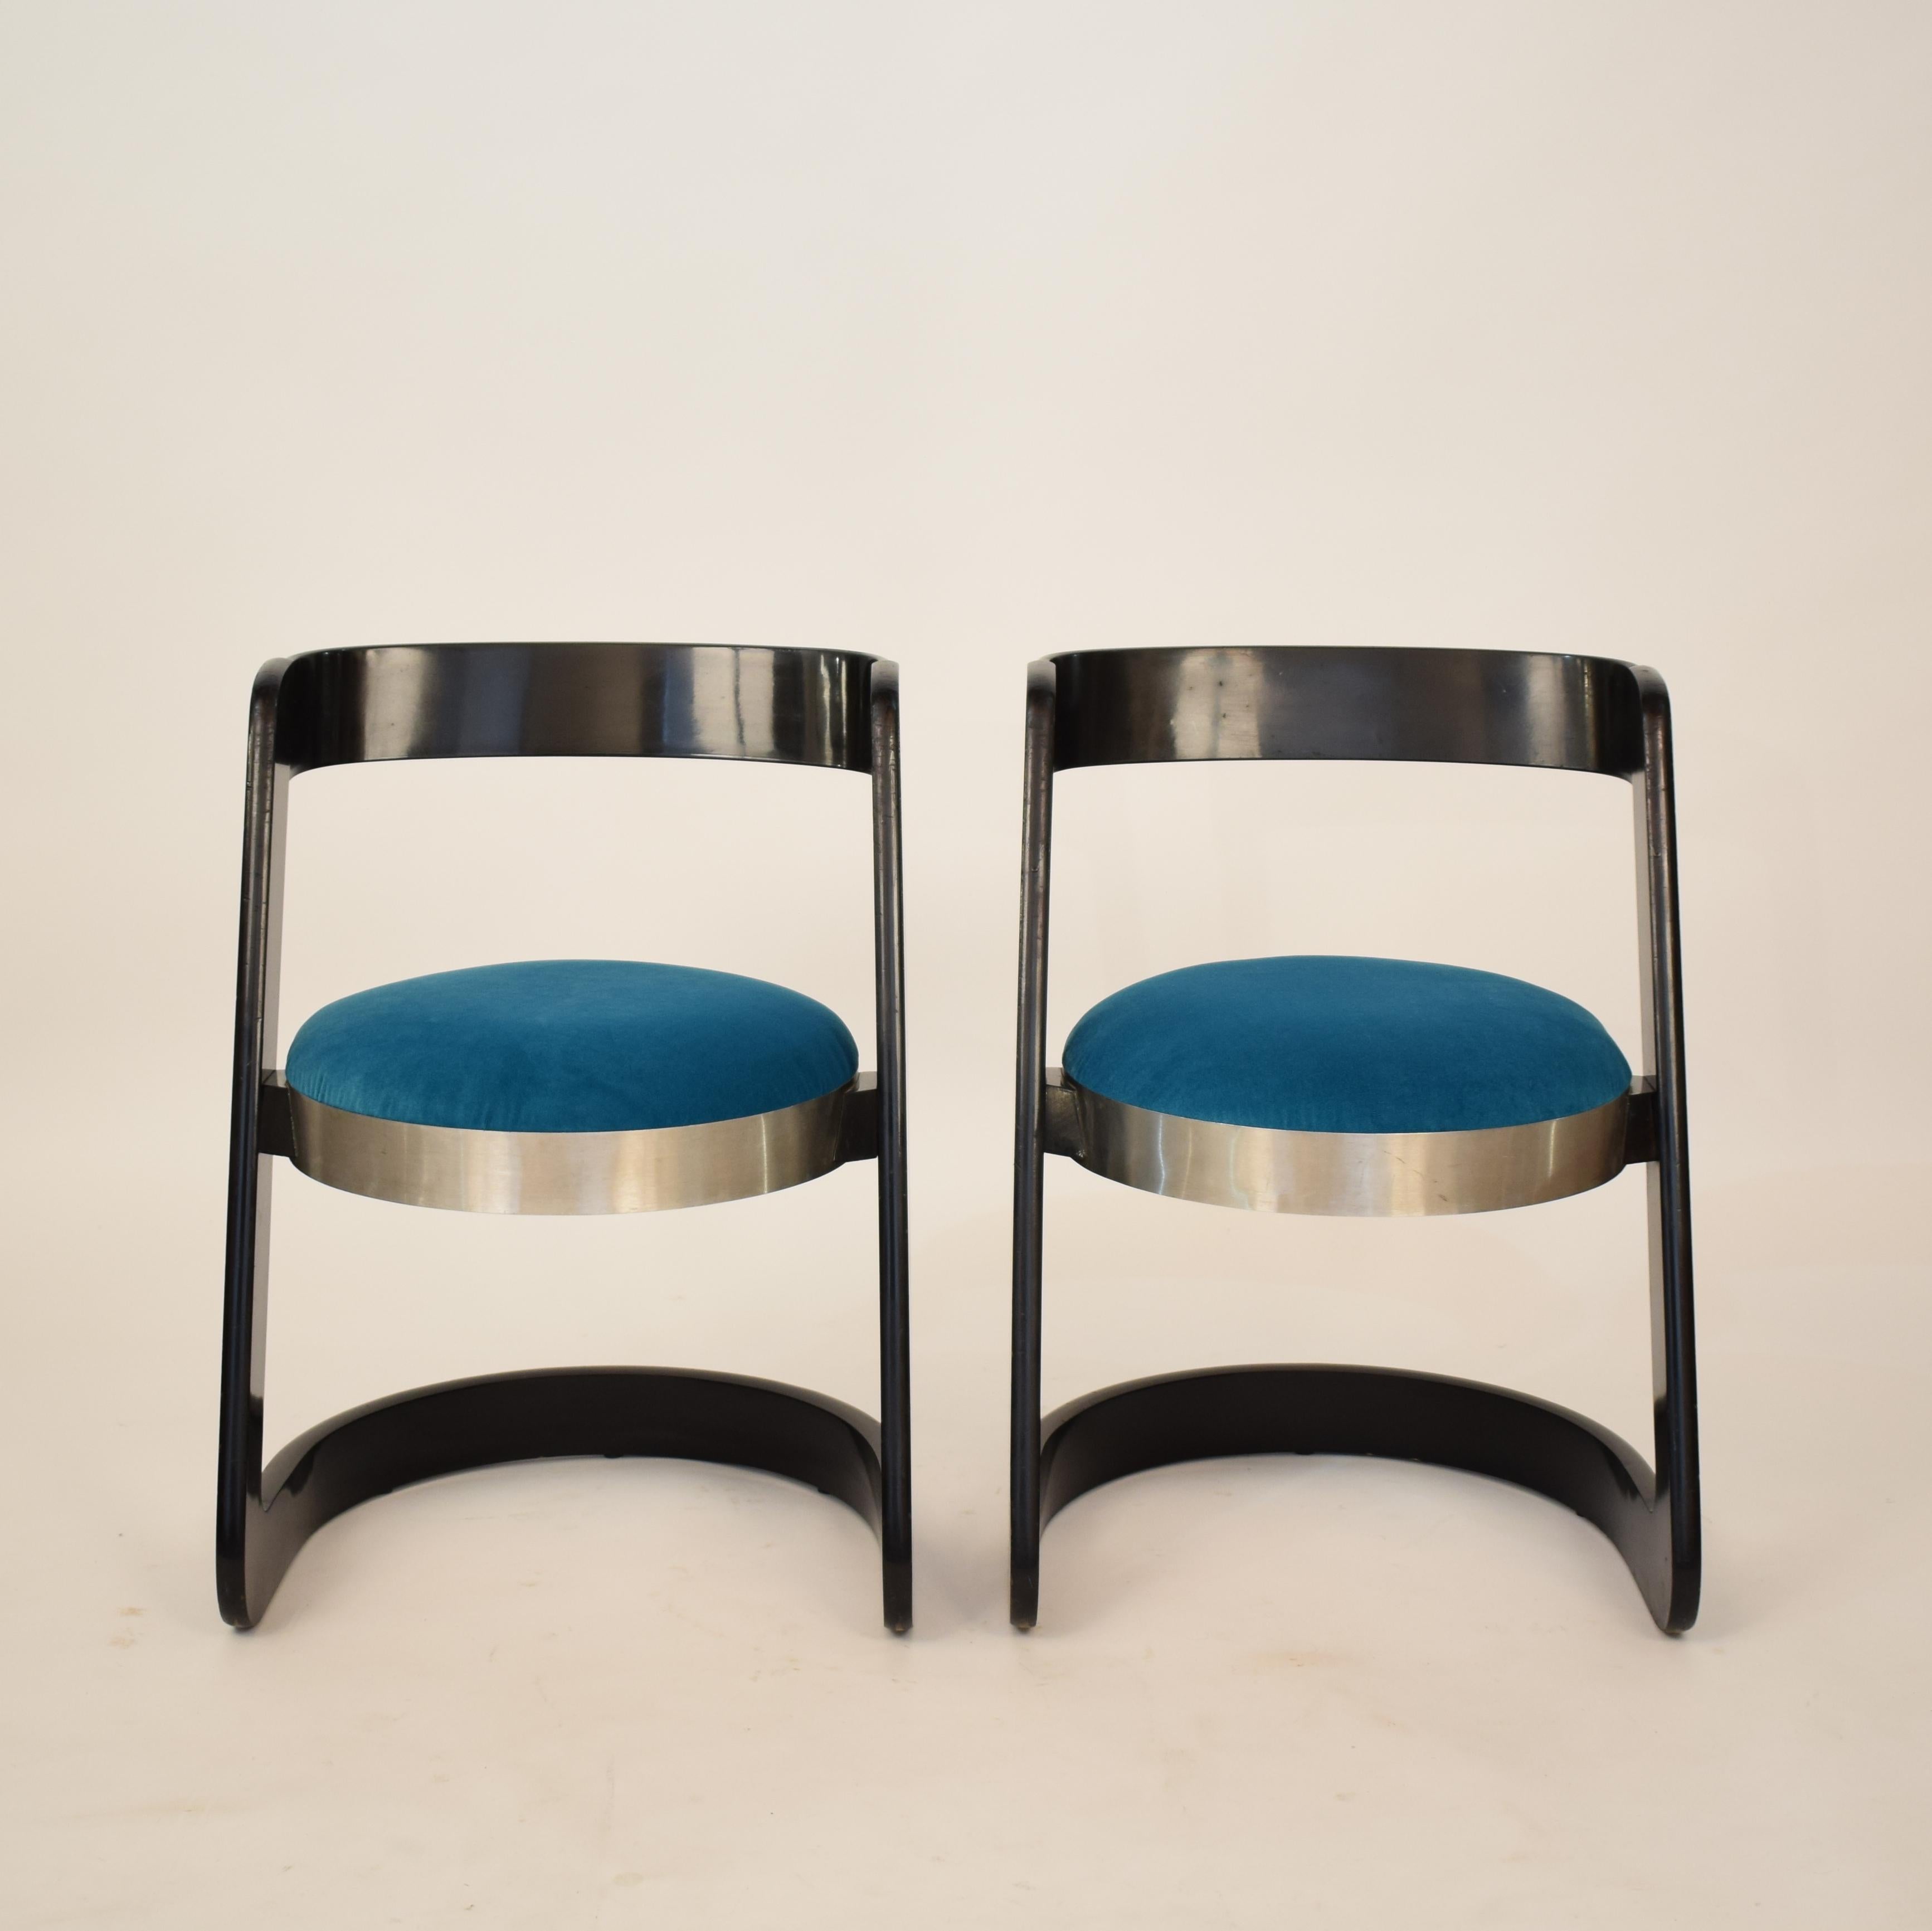 Those two beautiful midcentury or Space Age chairs where designed in 1970 by Willy Rizzo for Mario Sabot.
They are in black lacquered wood with aluminum and the seat upholstery is in turquoise velvet.
The chairs are one of Rizzo most important